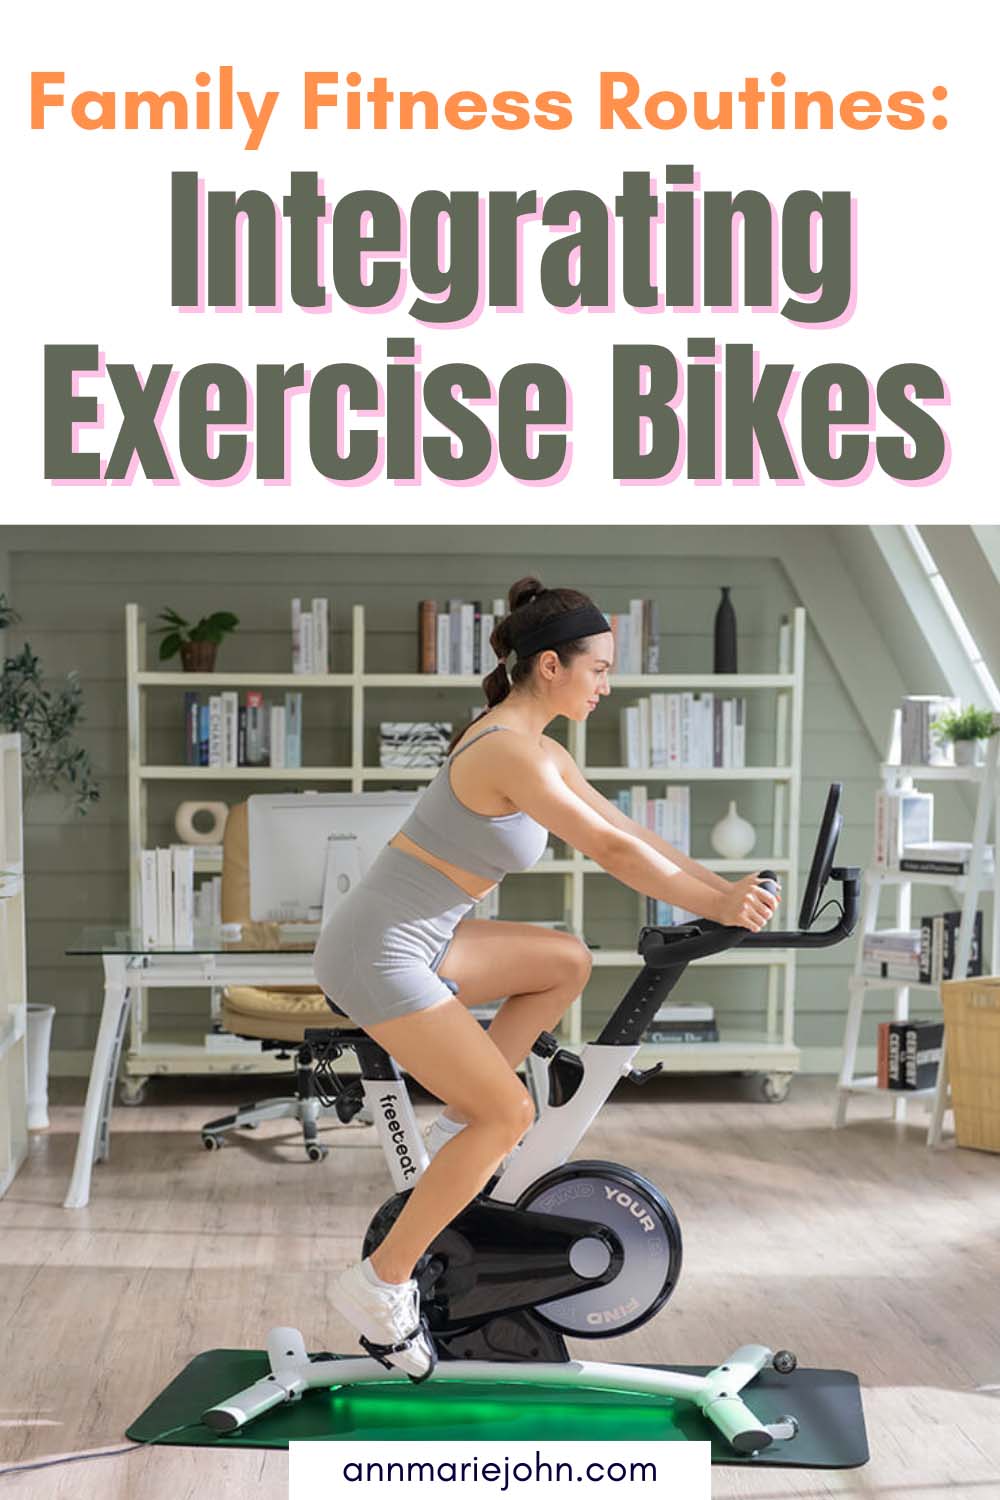 Family Fitness Routines: Integrating Exercise Bikes